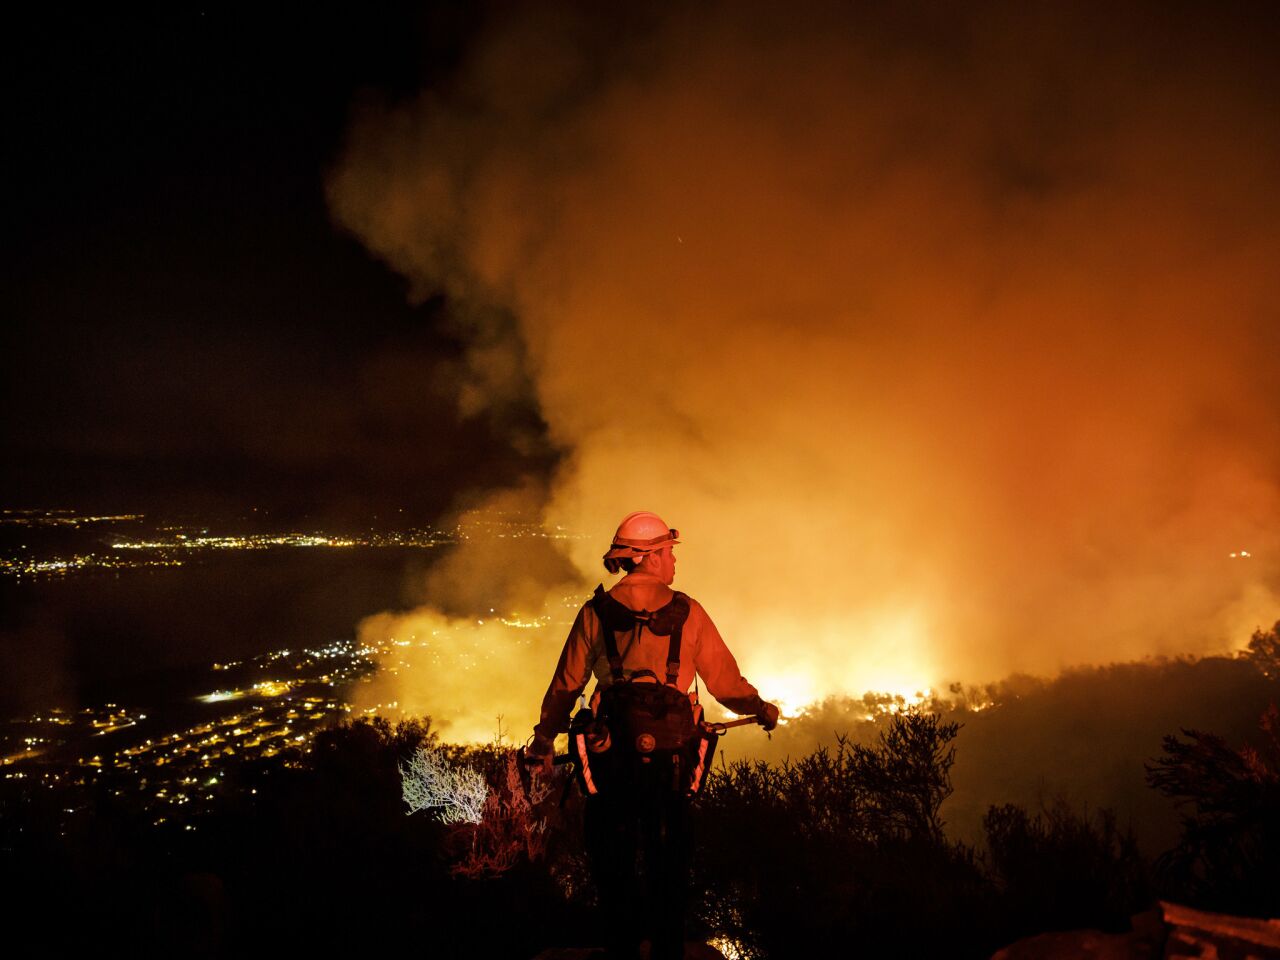 Firefighters watch for flareups as they prevent the flames from the Holy fire from crossing the Ortega Highway in Lake Elsinore.